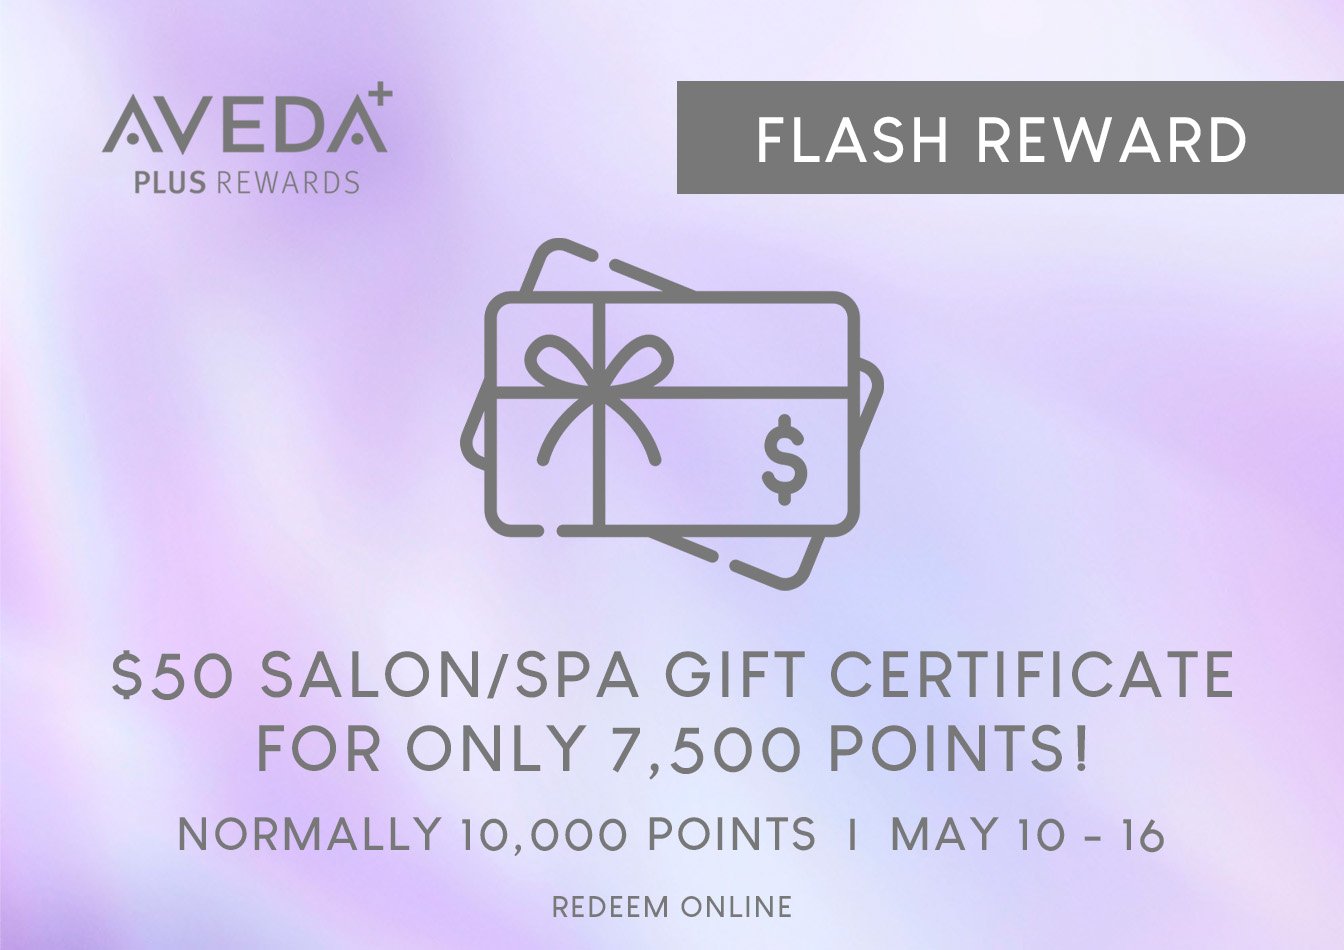 Psst...Aveda Plus Rewards Members!! Starting tomorrow through May 16th redeem 7,500 points {normally 10,000 pts} for a $50 salon/spa certificate!! 

Don't miss out on this awesome flash reward!! 

Log into your Aveda Plus Rewards account to redeem or